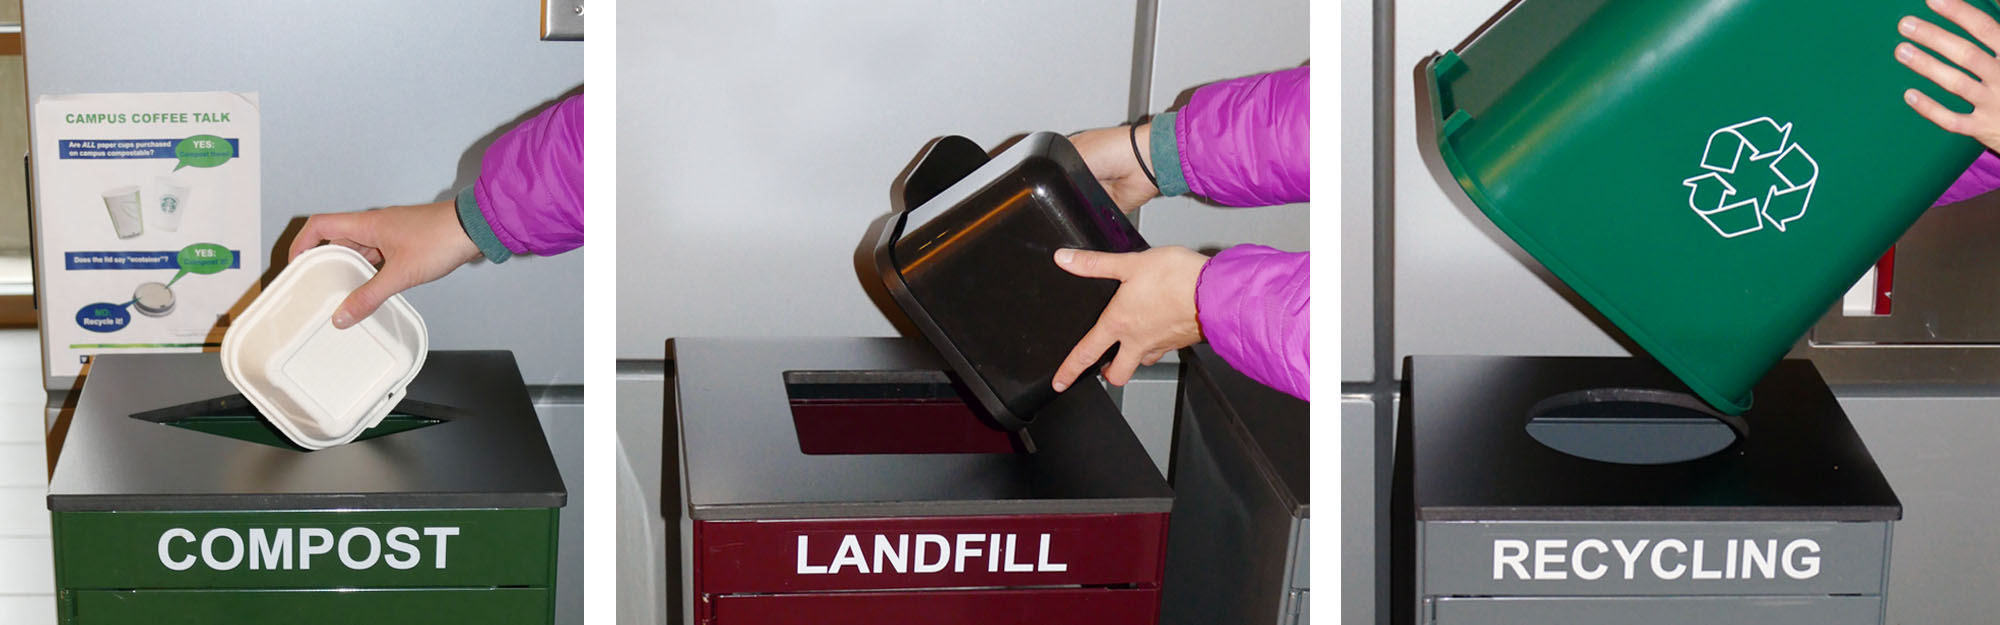 Desk-side MiniMax bins are based on a self-service model. Building occupants are responsible for emptying their compostable, landfill and recyclable items.